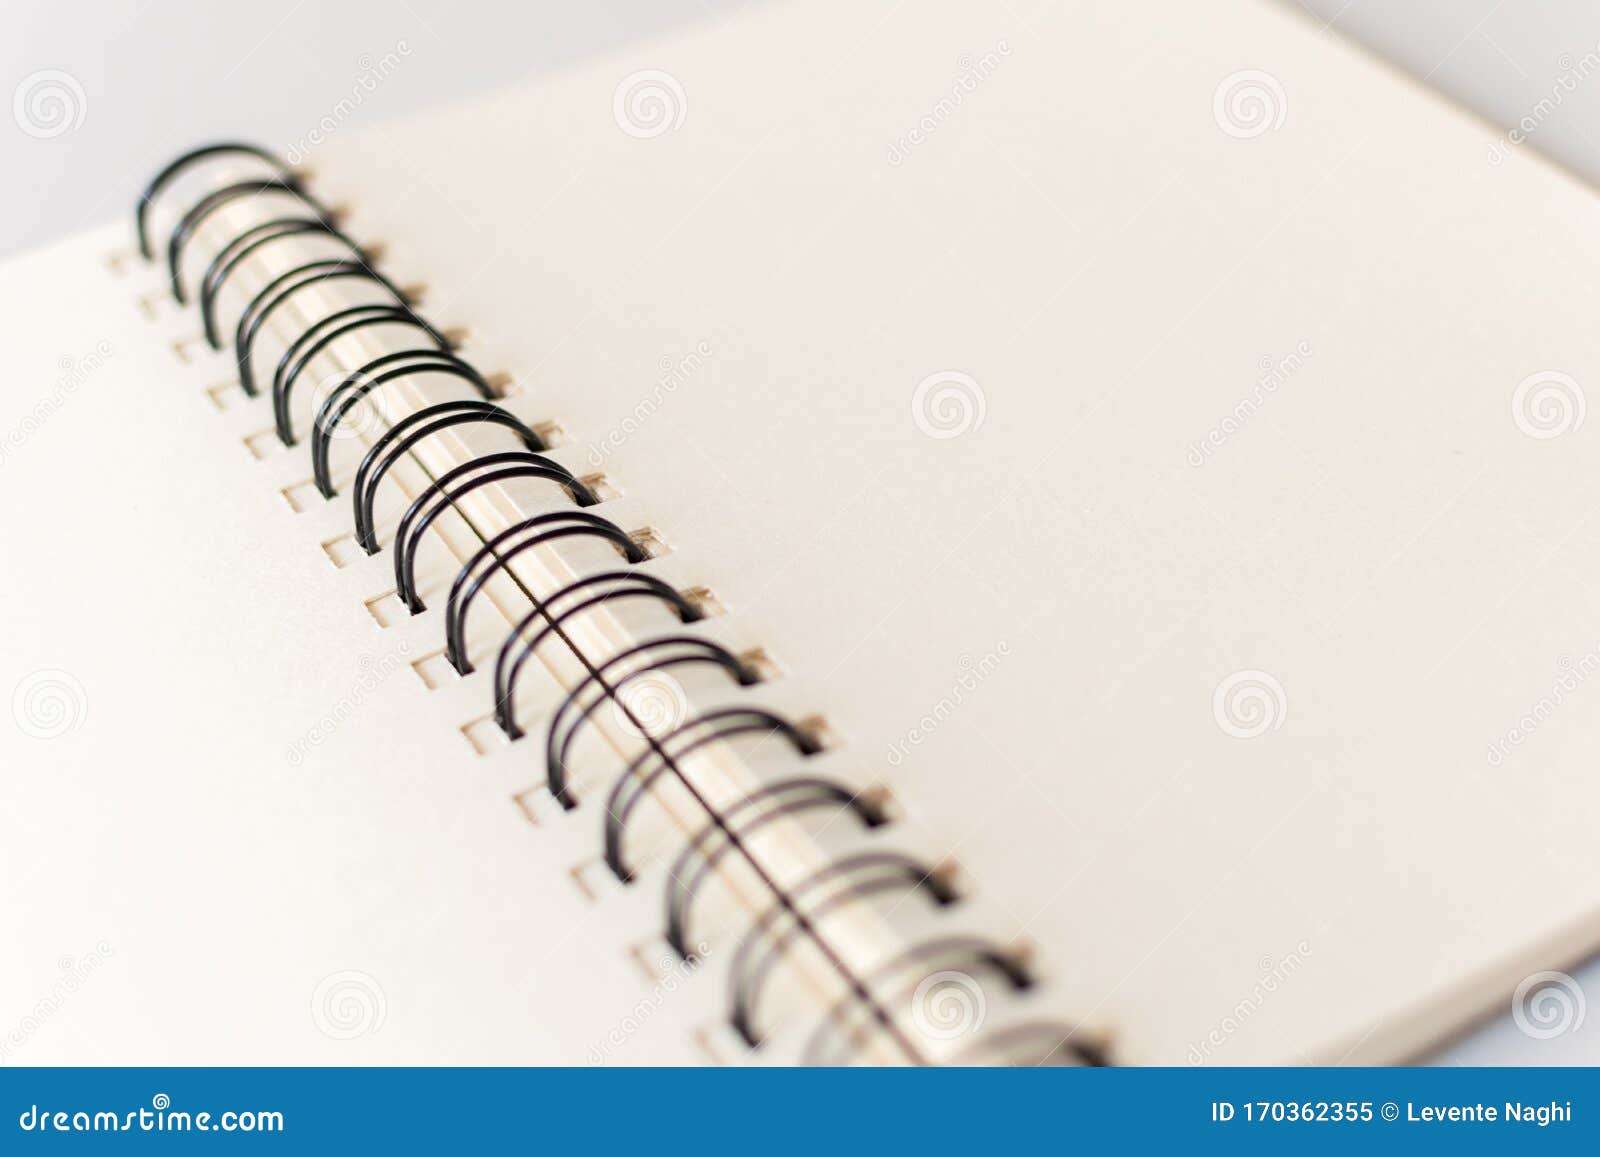 close up shot of an open blank sketchbook placed on a light gray table.